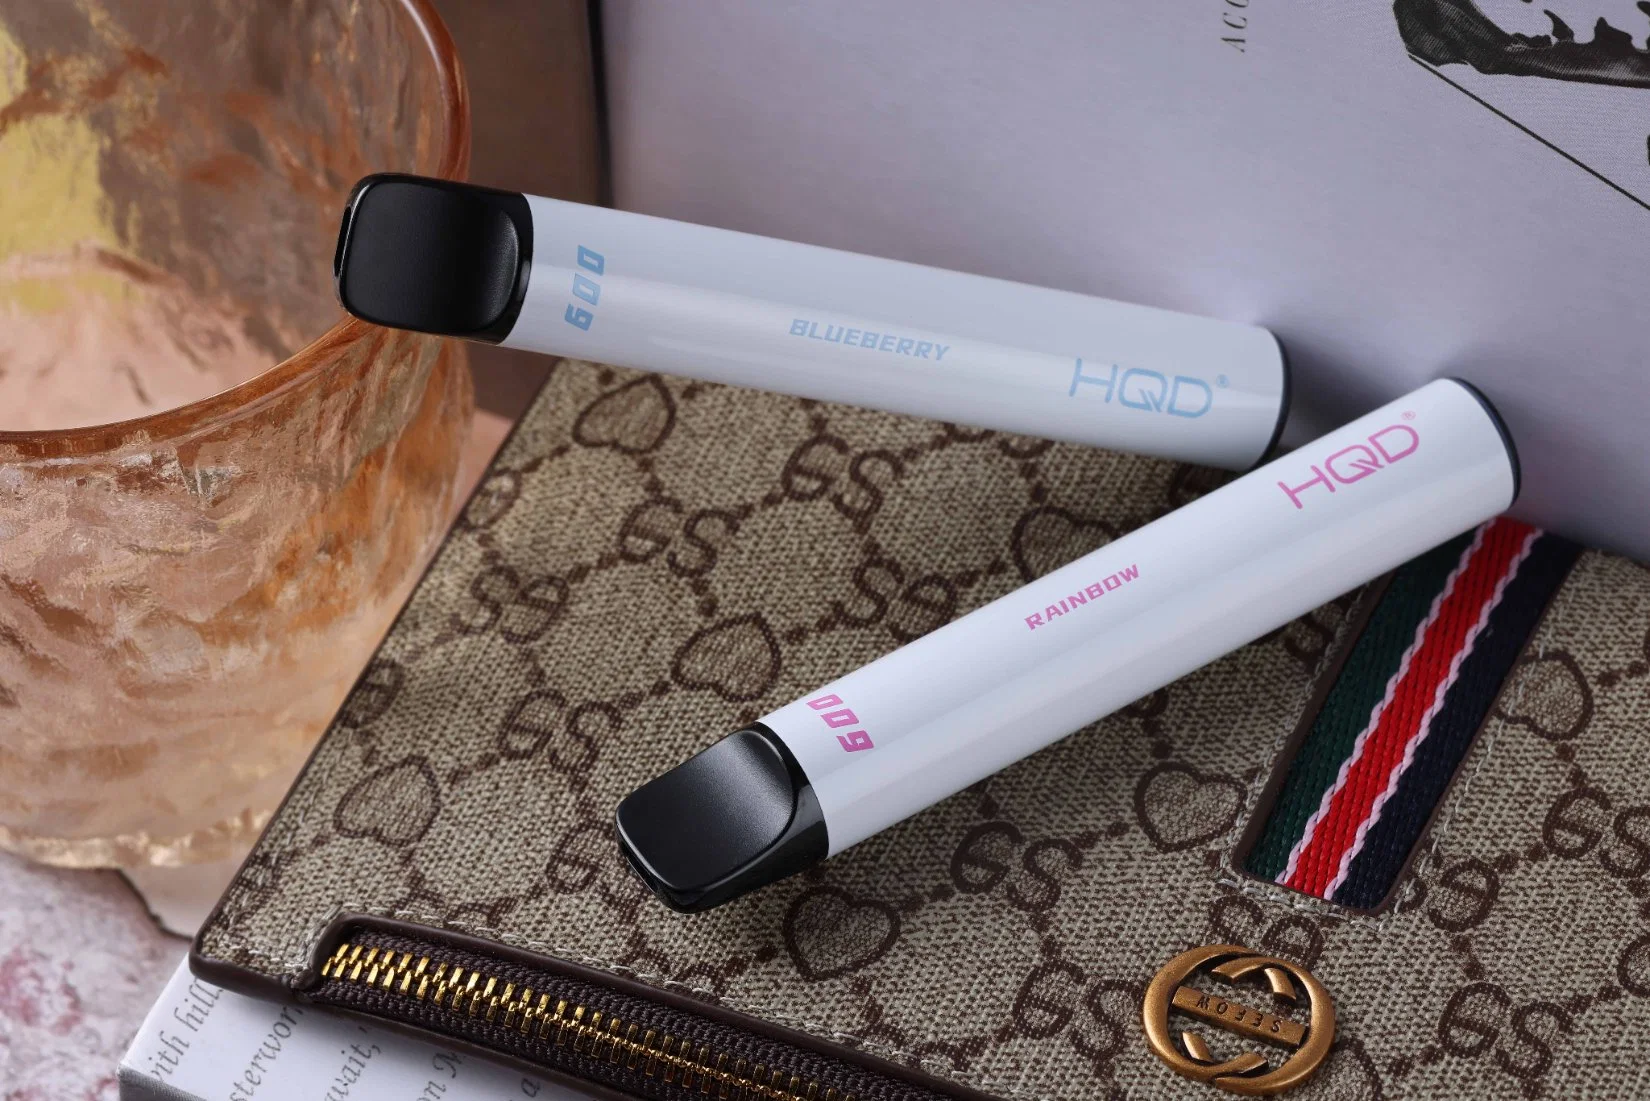 Hqd Disposable/Chargeable Vape Pen Style Esilجاير H097 600 600 نفخة